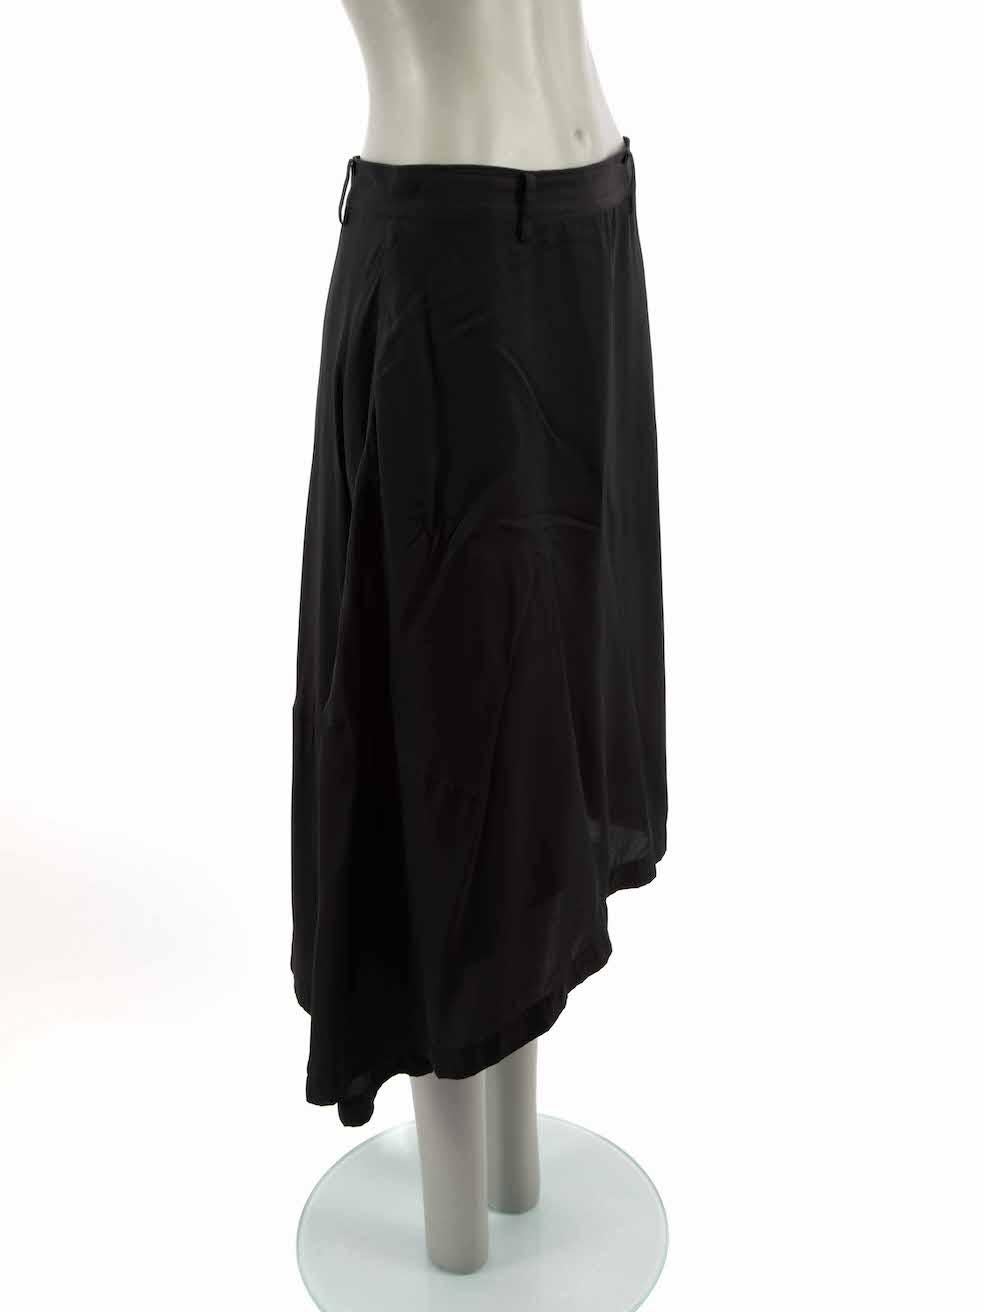 CONDITION is Good. Minor wear to skirt is evident. Light wear to fabric with negligible plucks to the weave at front on this used Y's Yohji Yamamoto designer resale item.

Details
Black
Synthetic
Asymmetric skirt
Midi length
Belt hoops
Side zip